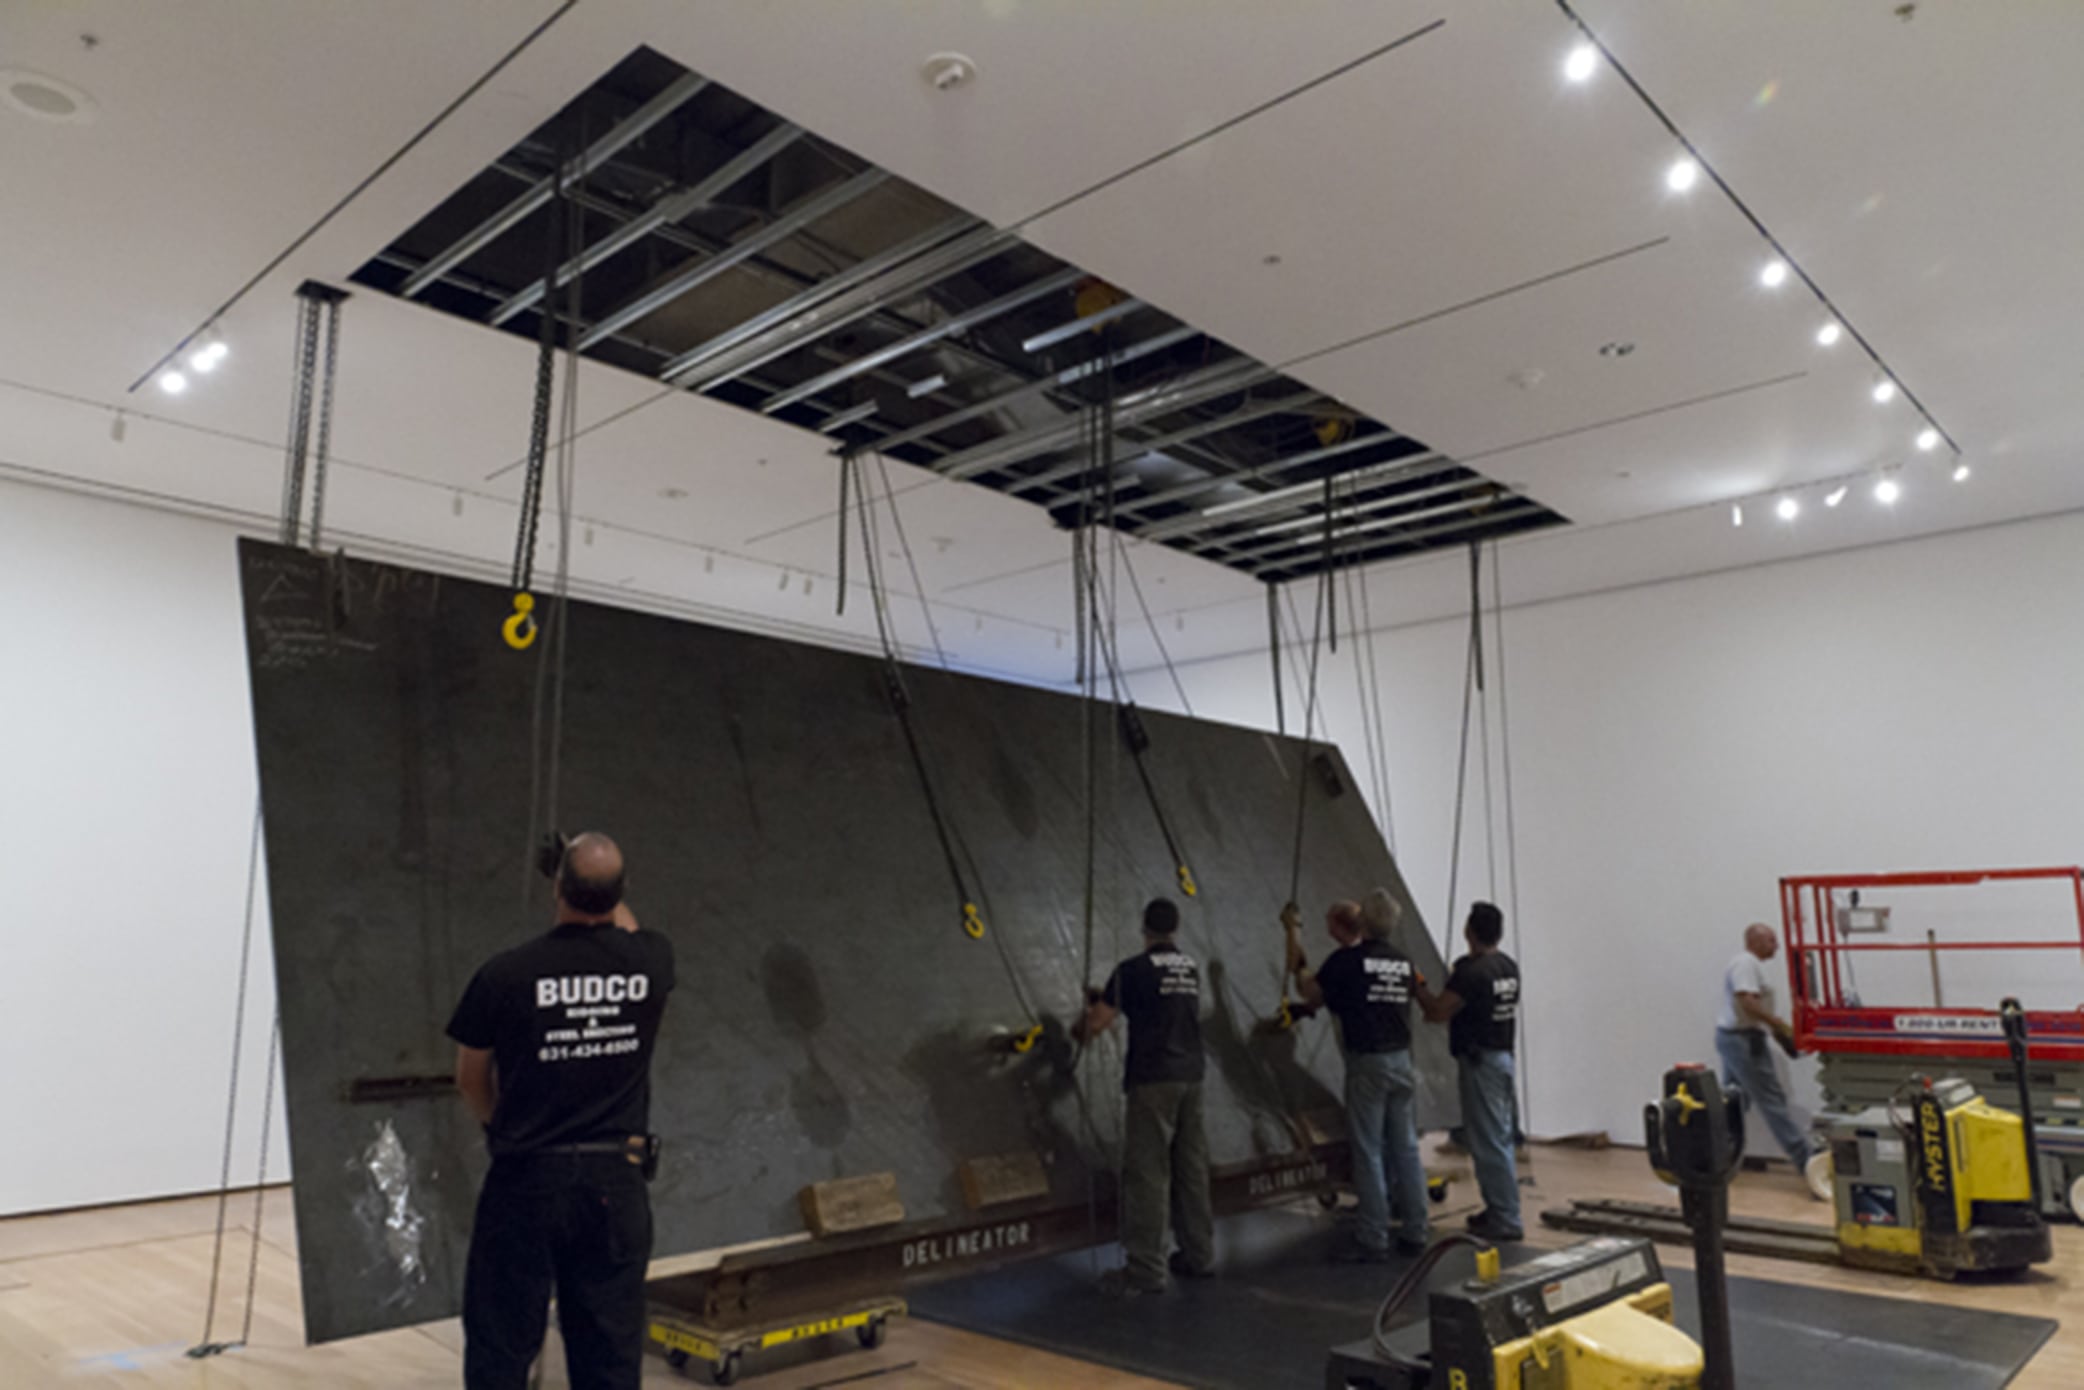 Richard Serra's Delineator Headed Up into the Ceiling Space